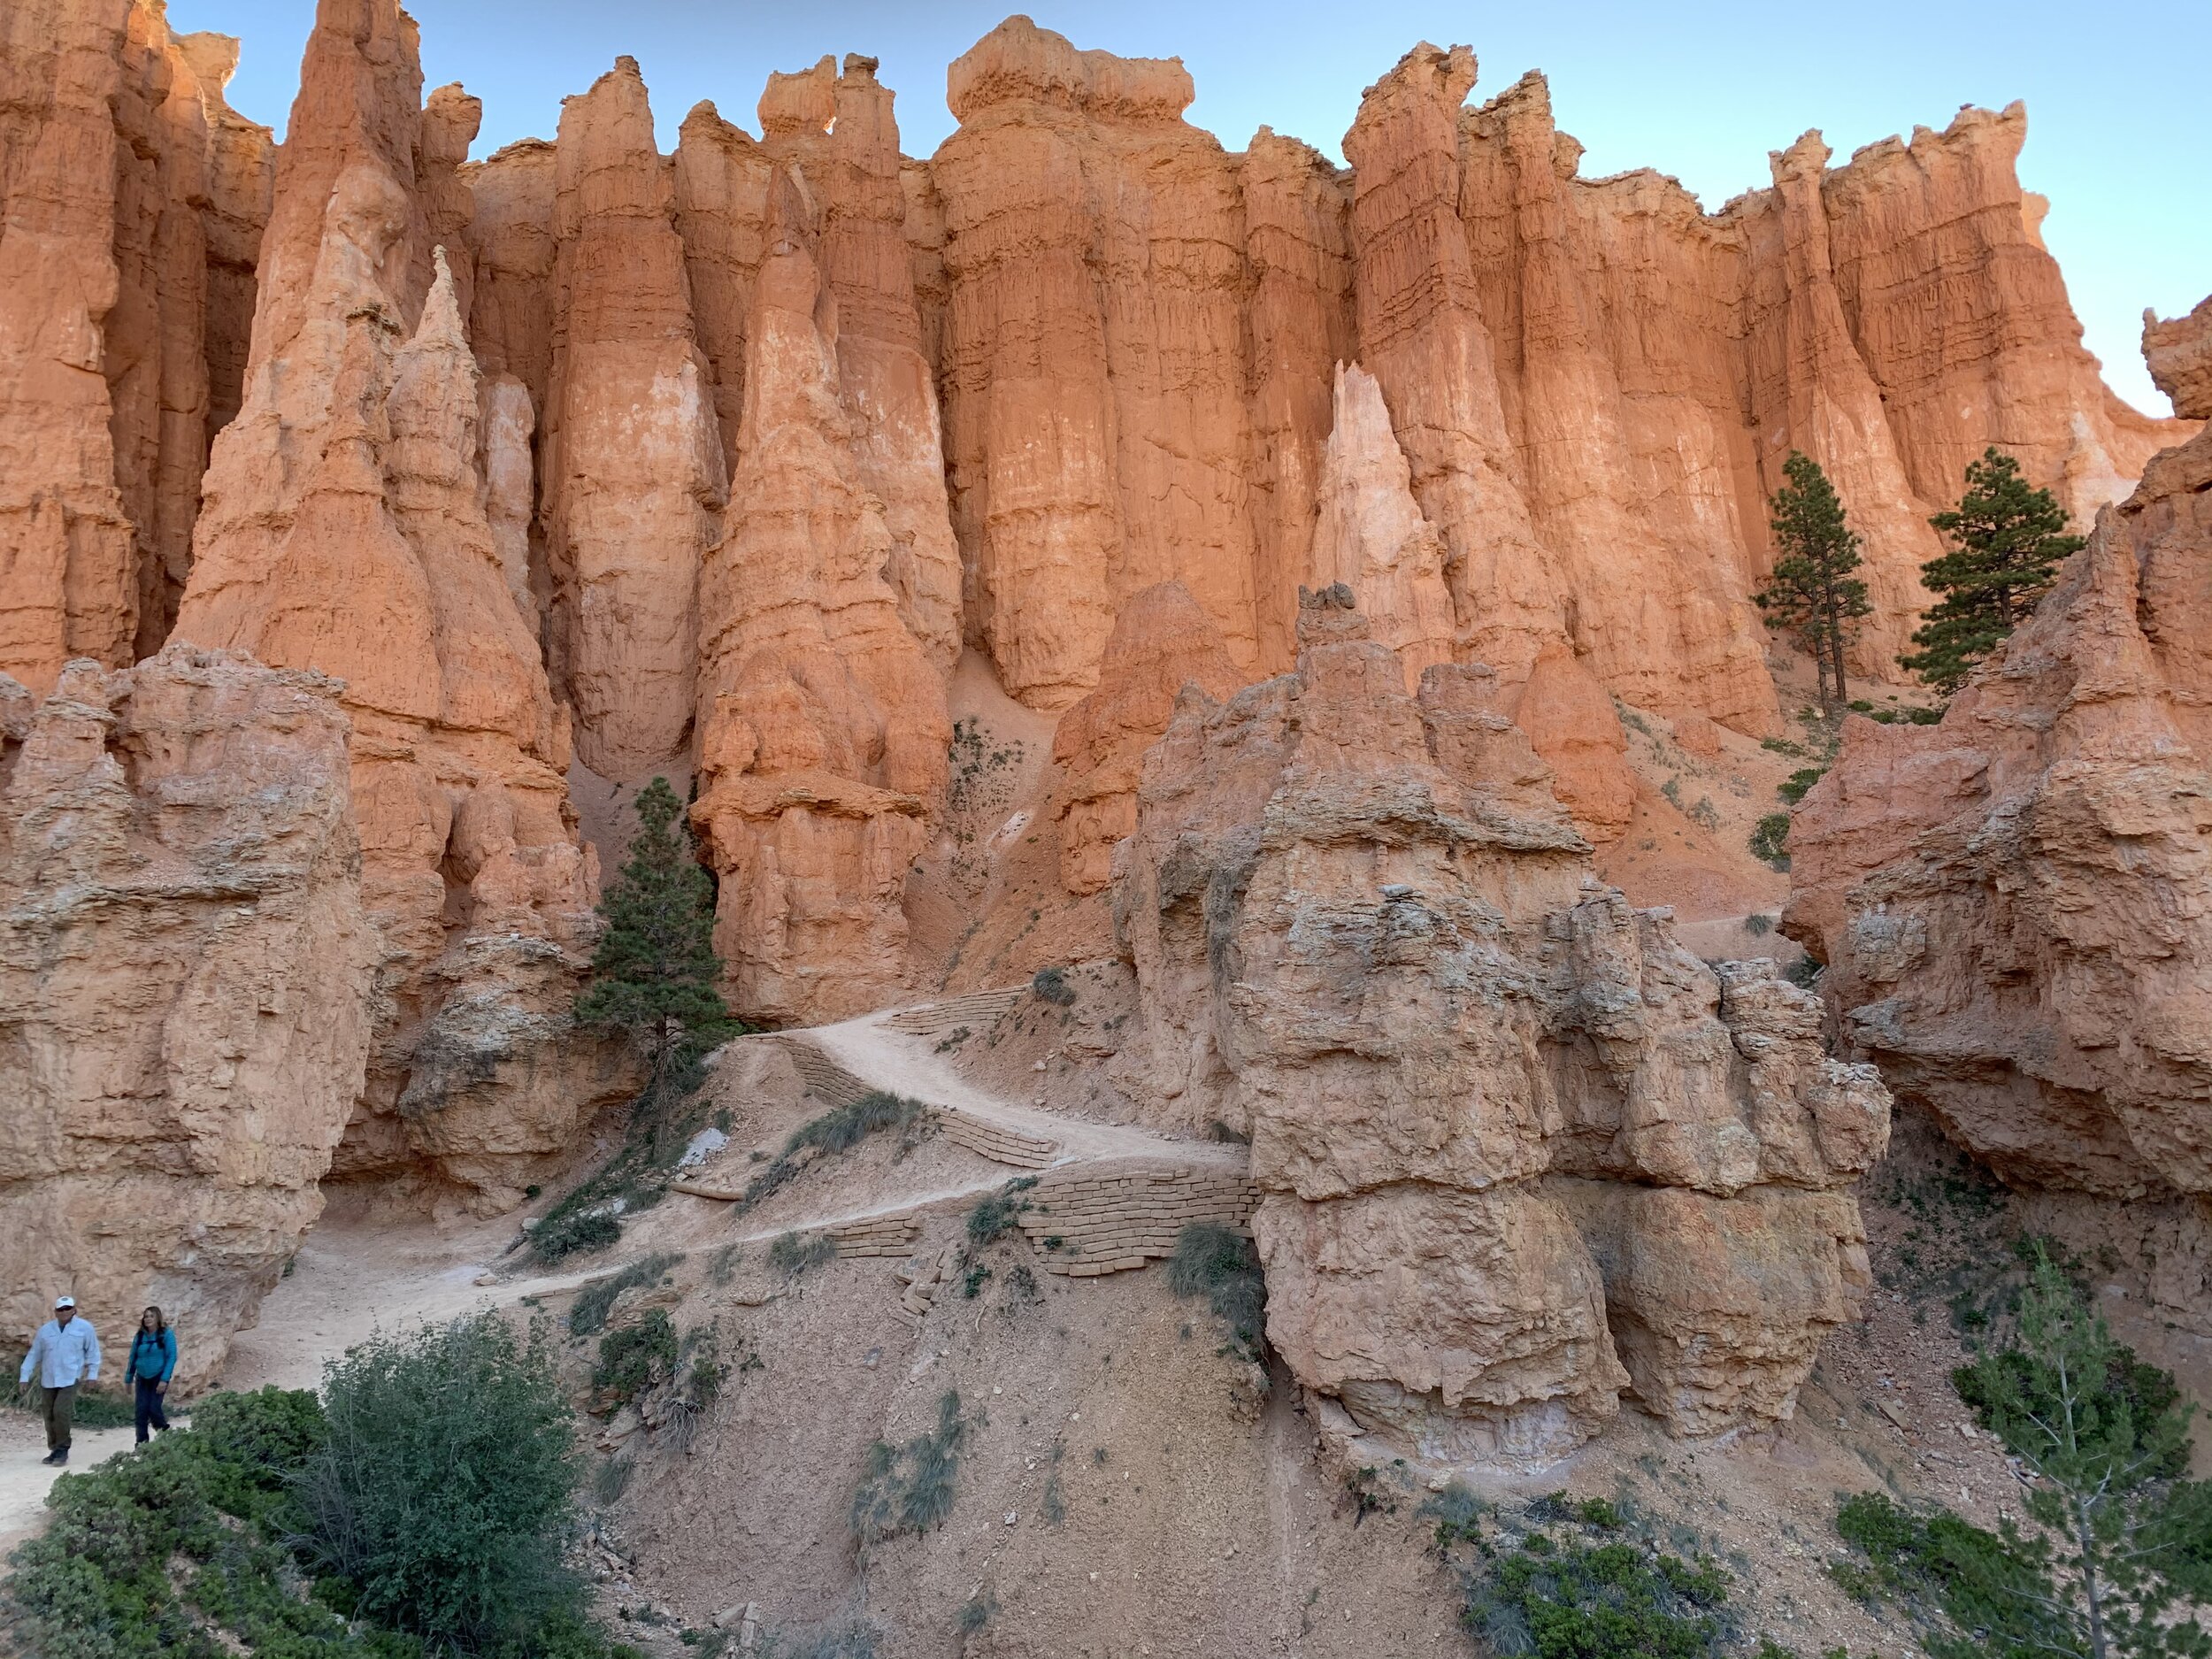  Bryce Canyon National Park is one of the most unusual and beautiful places we’ve seen so far.   